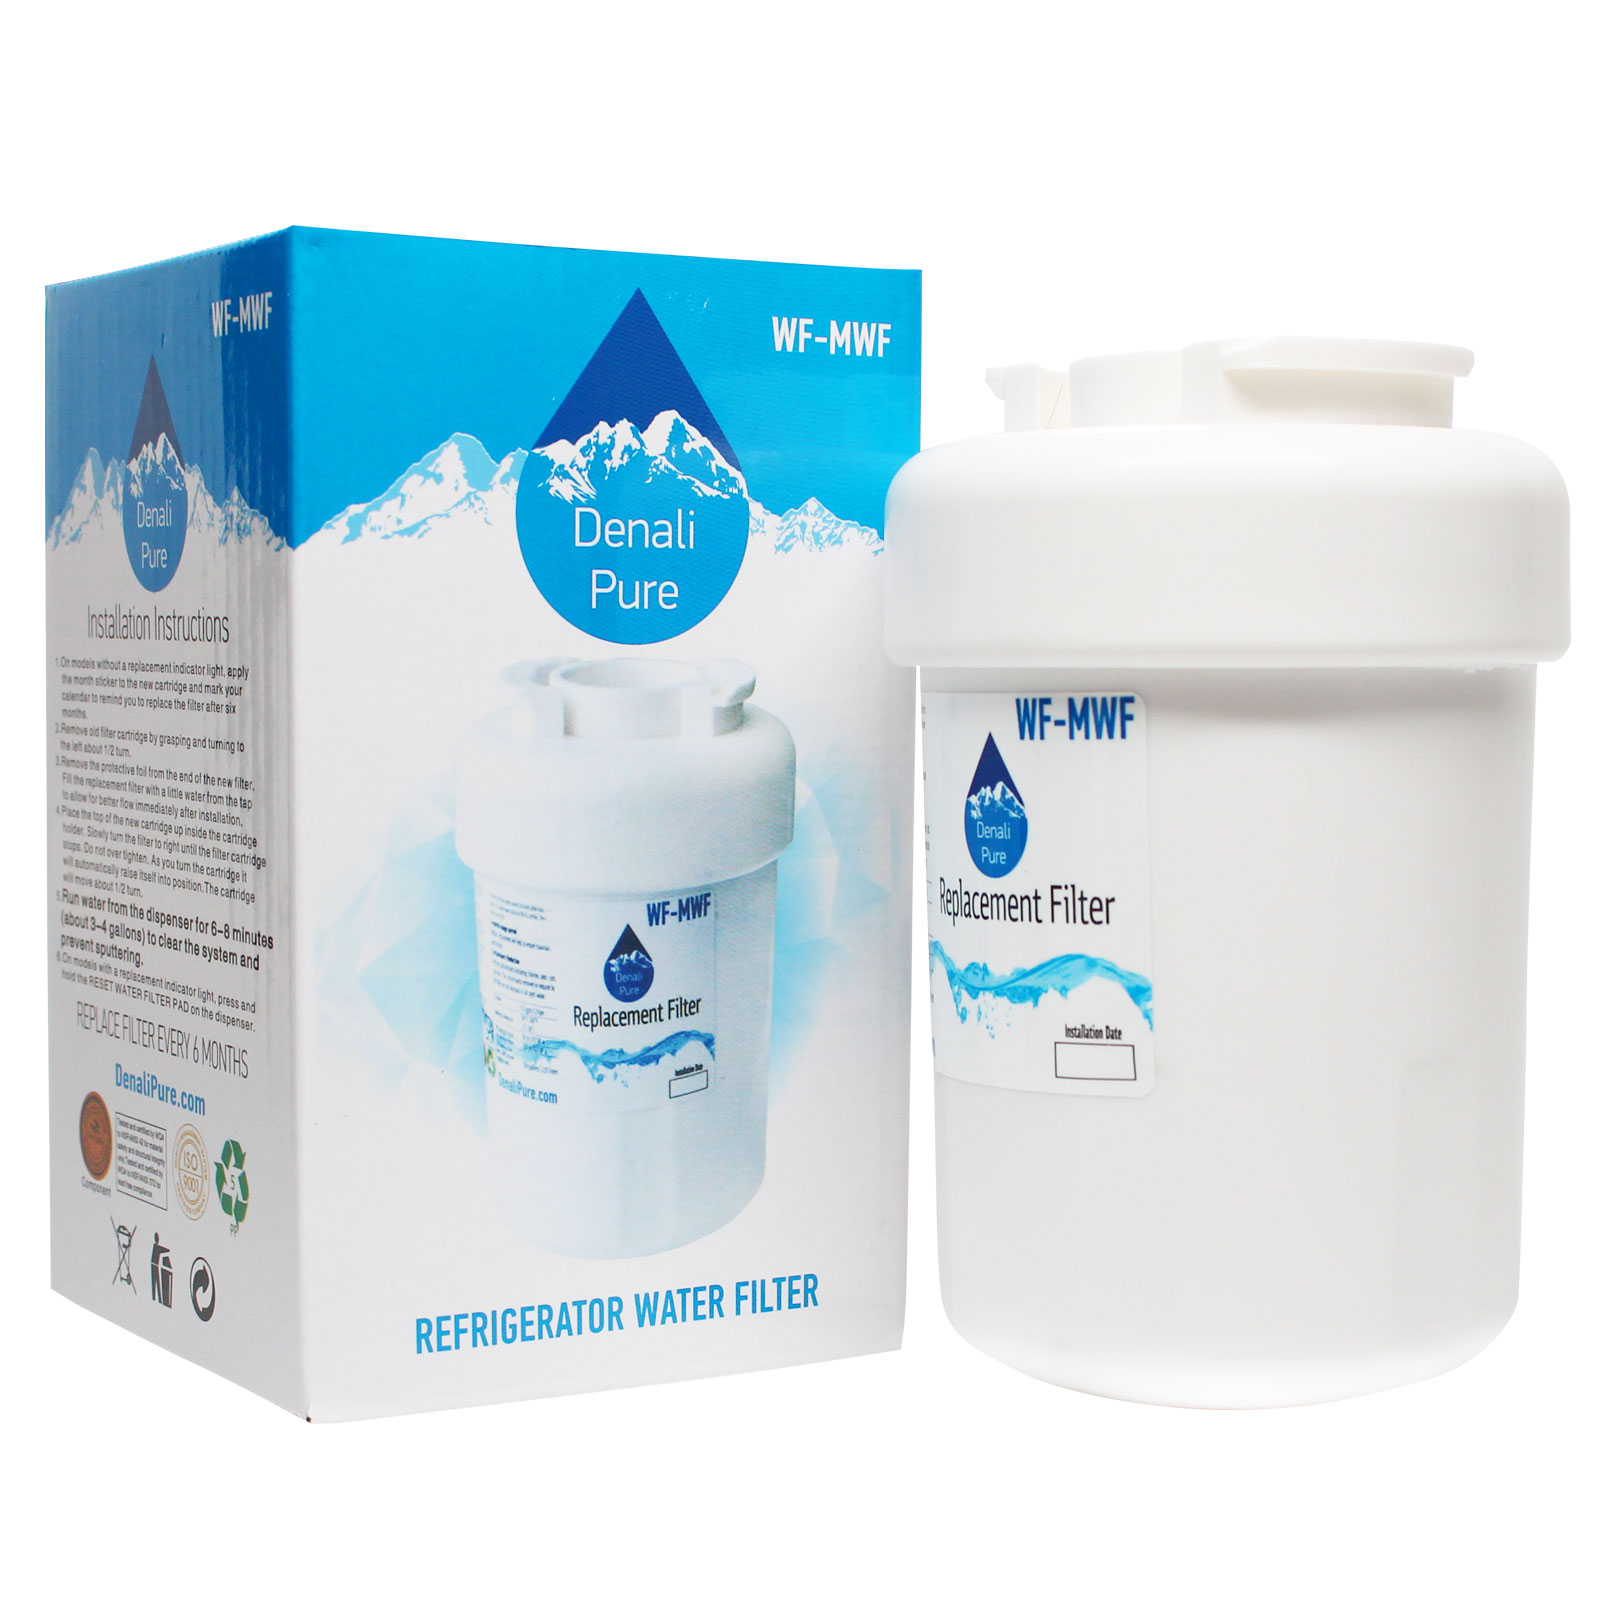 Denali Pure Replacement General Electric GSS25UFMCBB Refrigerator Water Filter - For General Electric MWF, MWFP Water Filter Cartridge